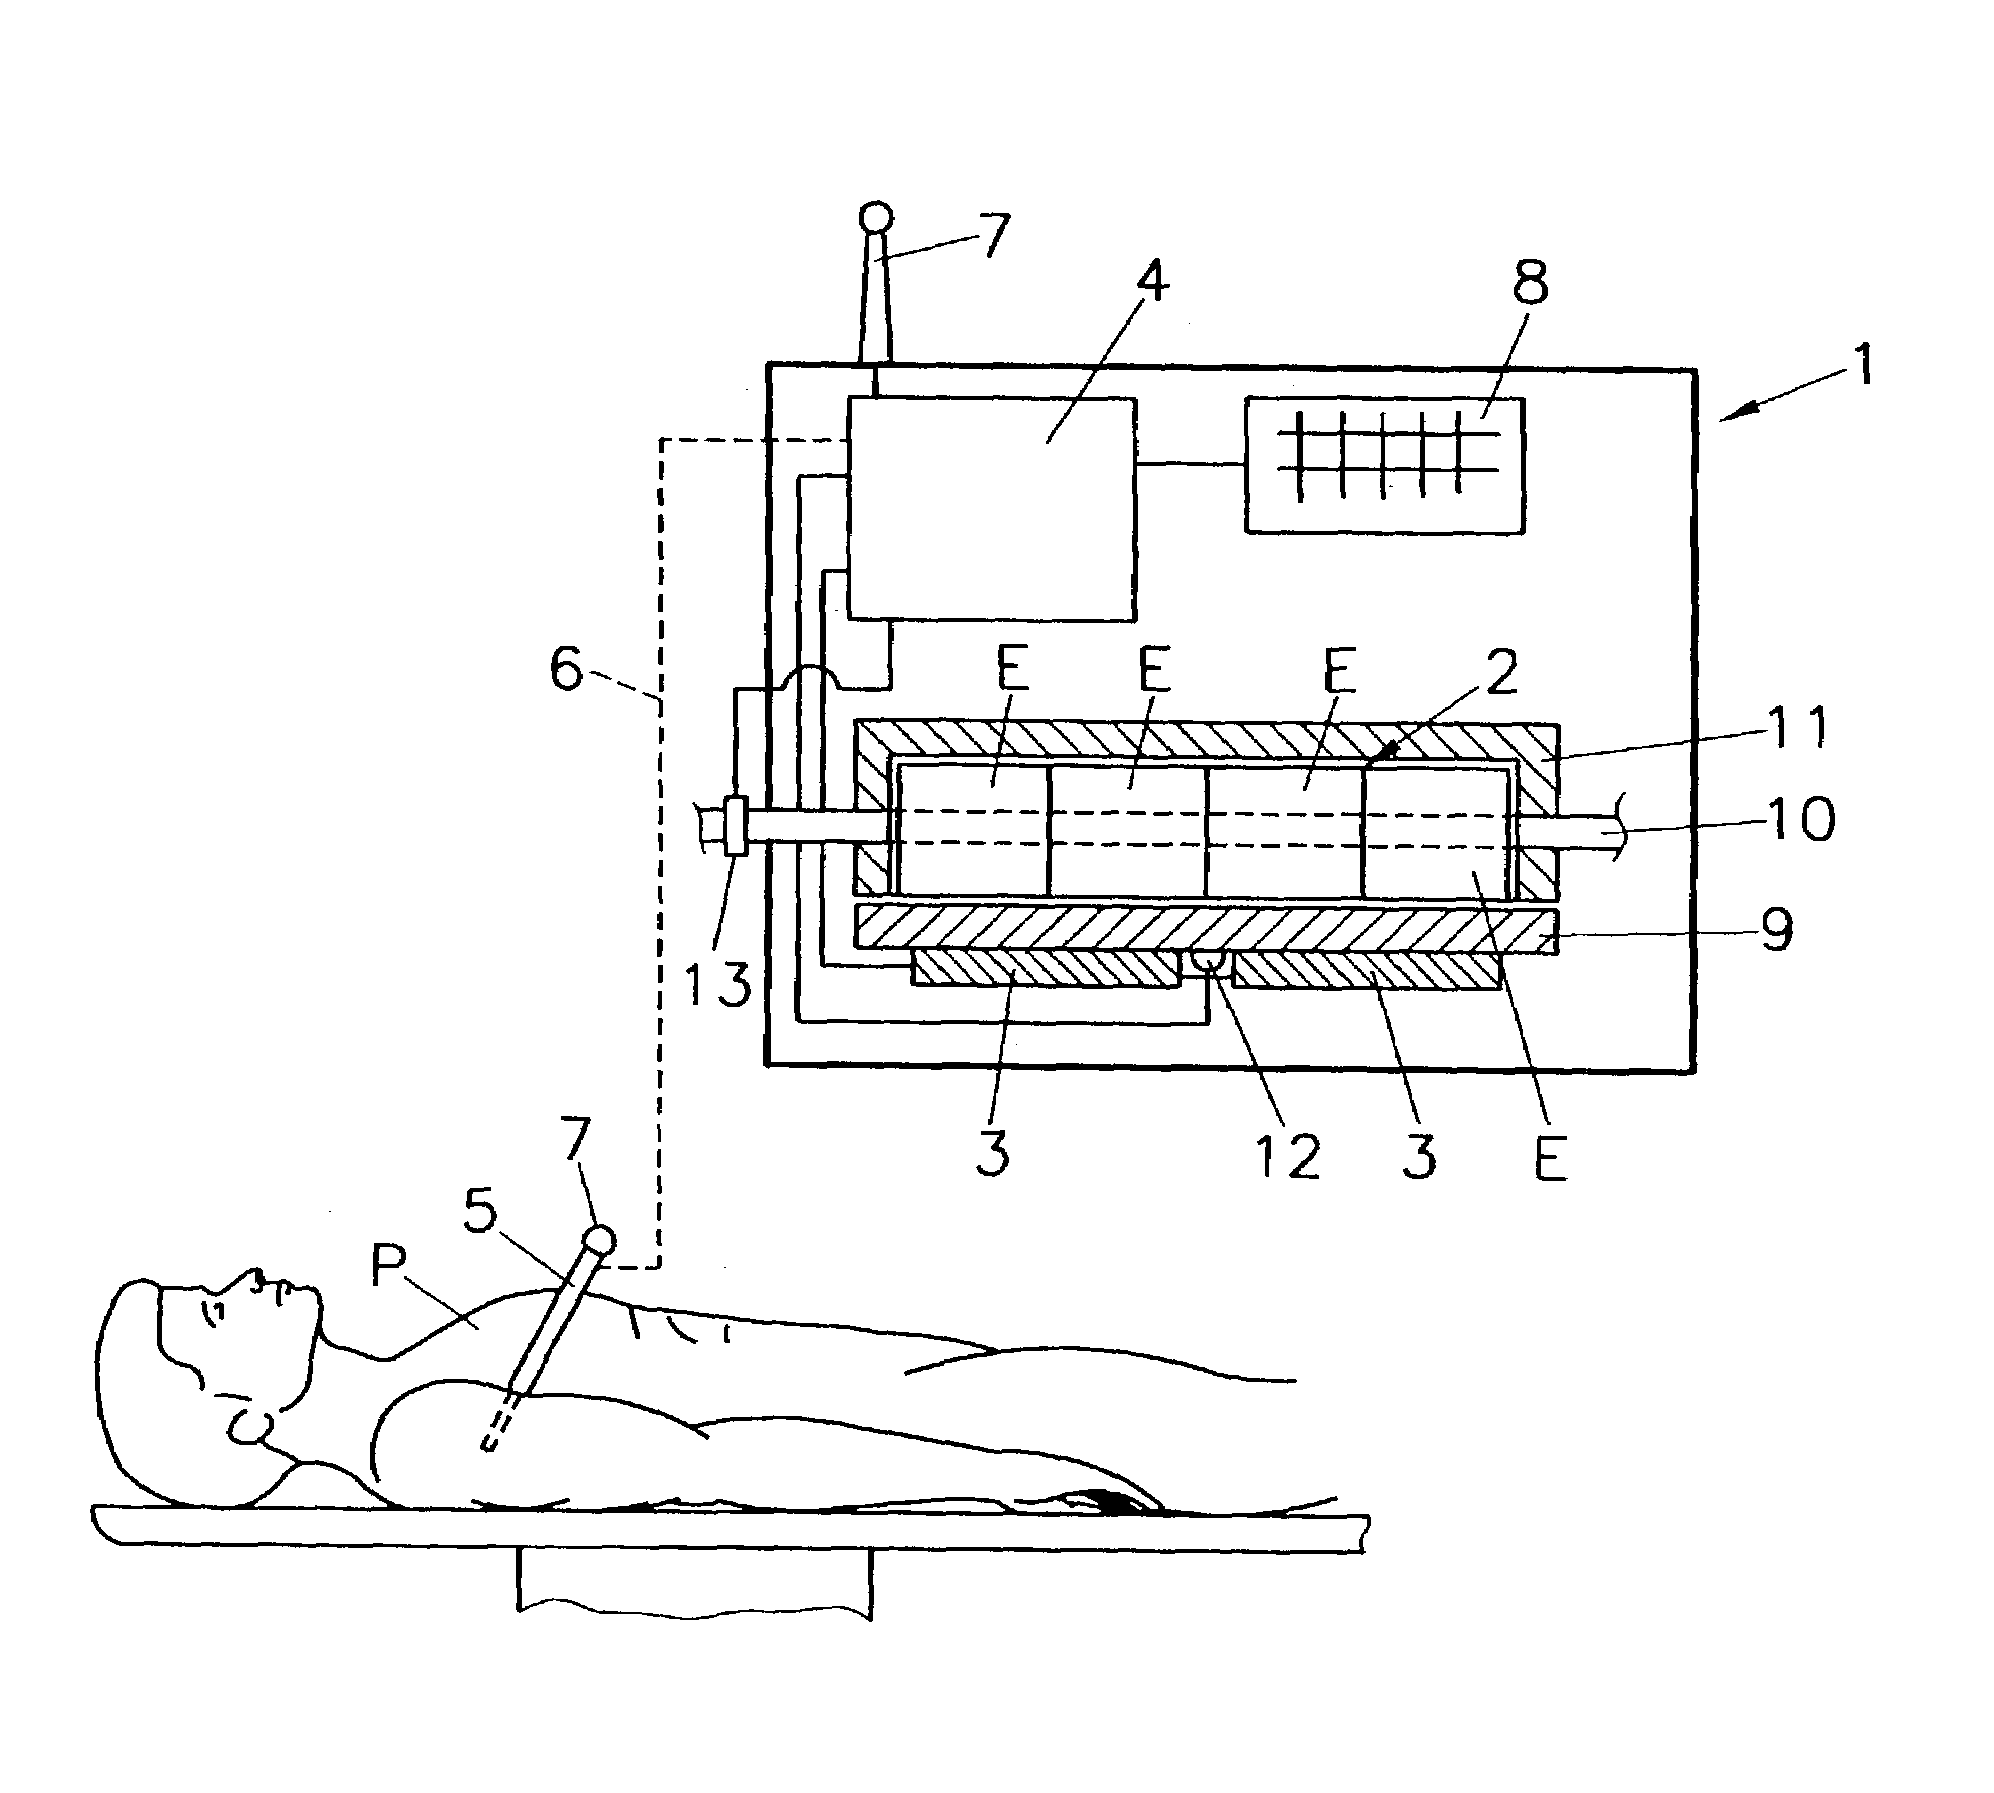 Method and device for measuring blood gas parameters